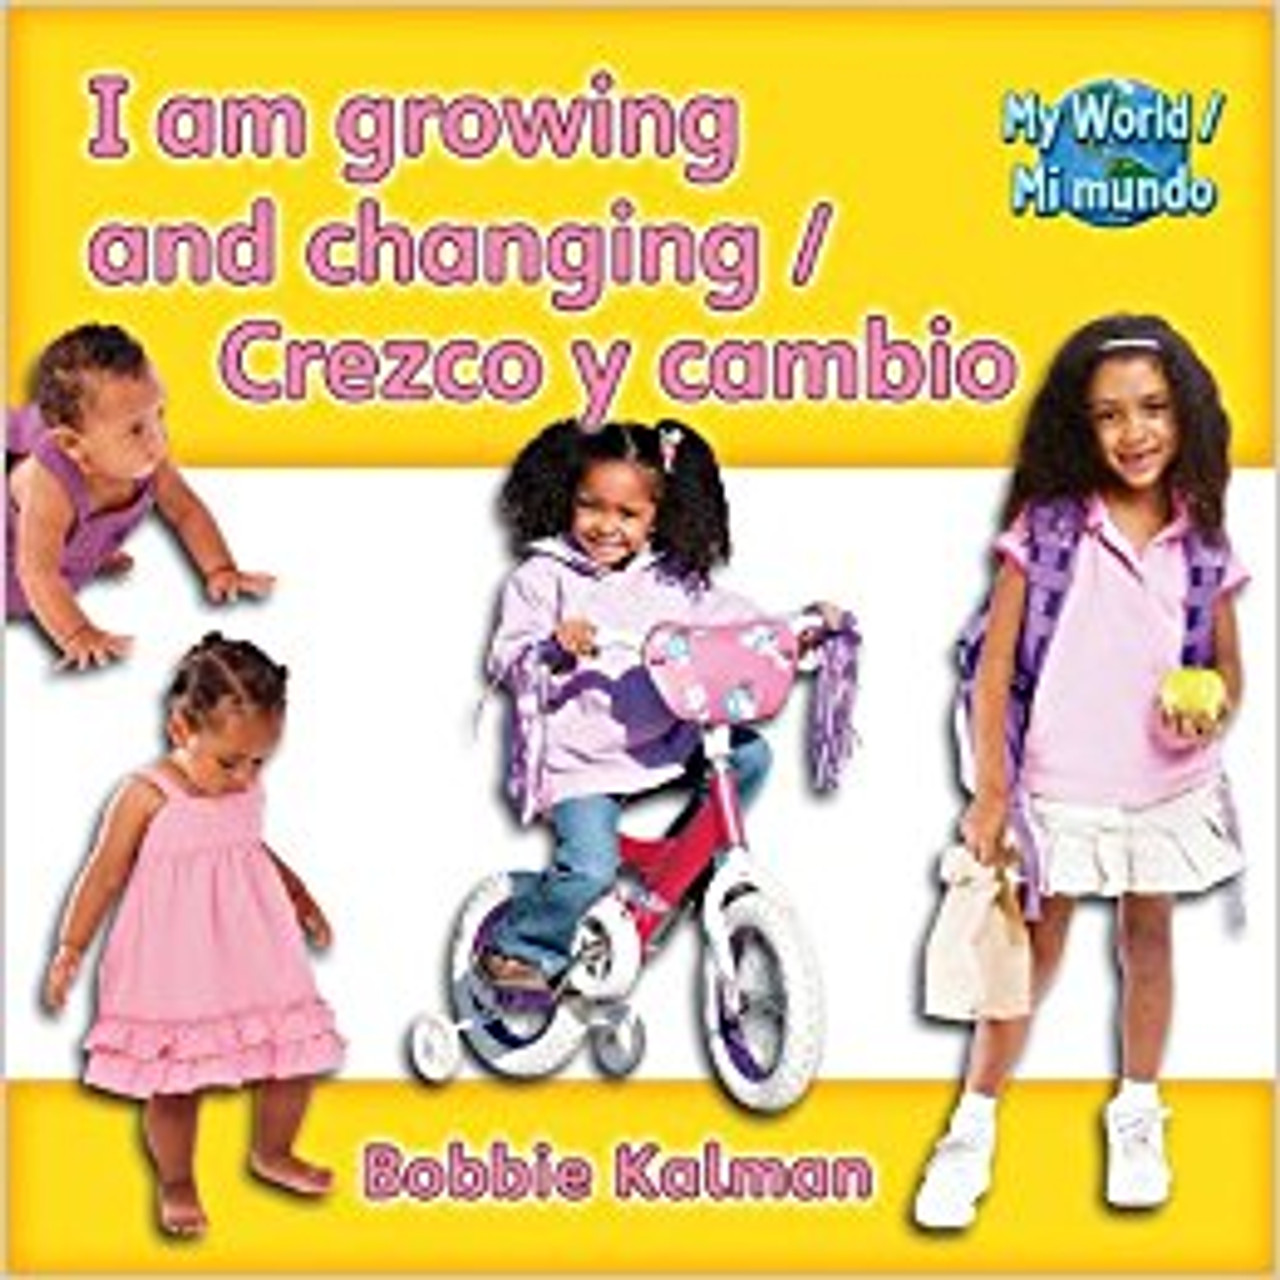 I Am Growing and Changing/Crezco y Cambio by Bobbie Kalman